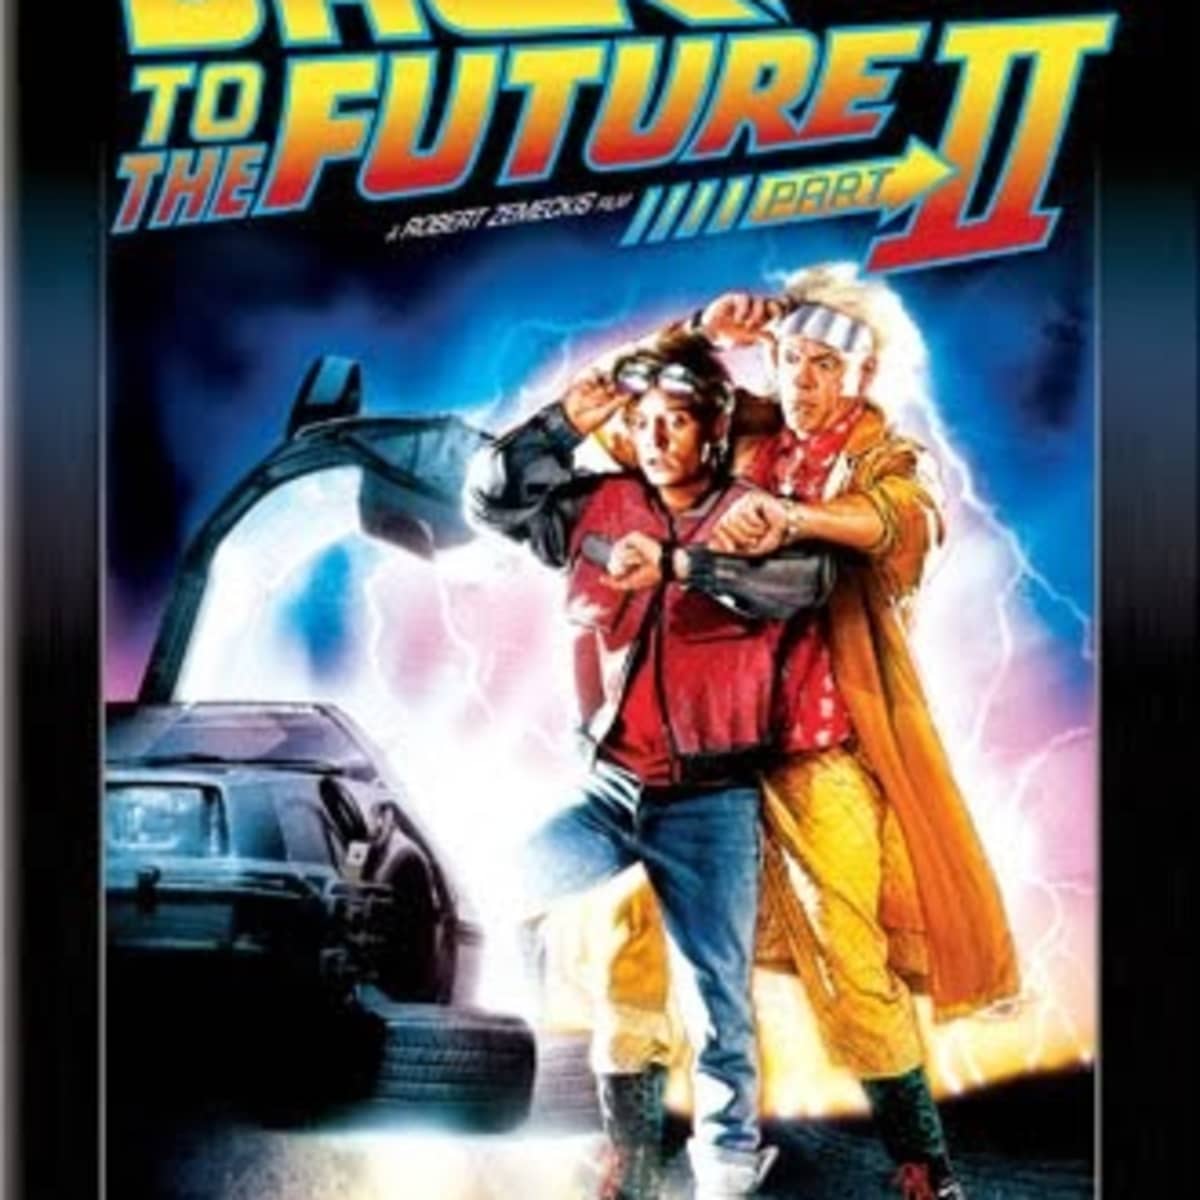 where can i watch back to the future 3